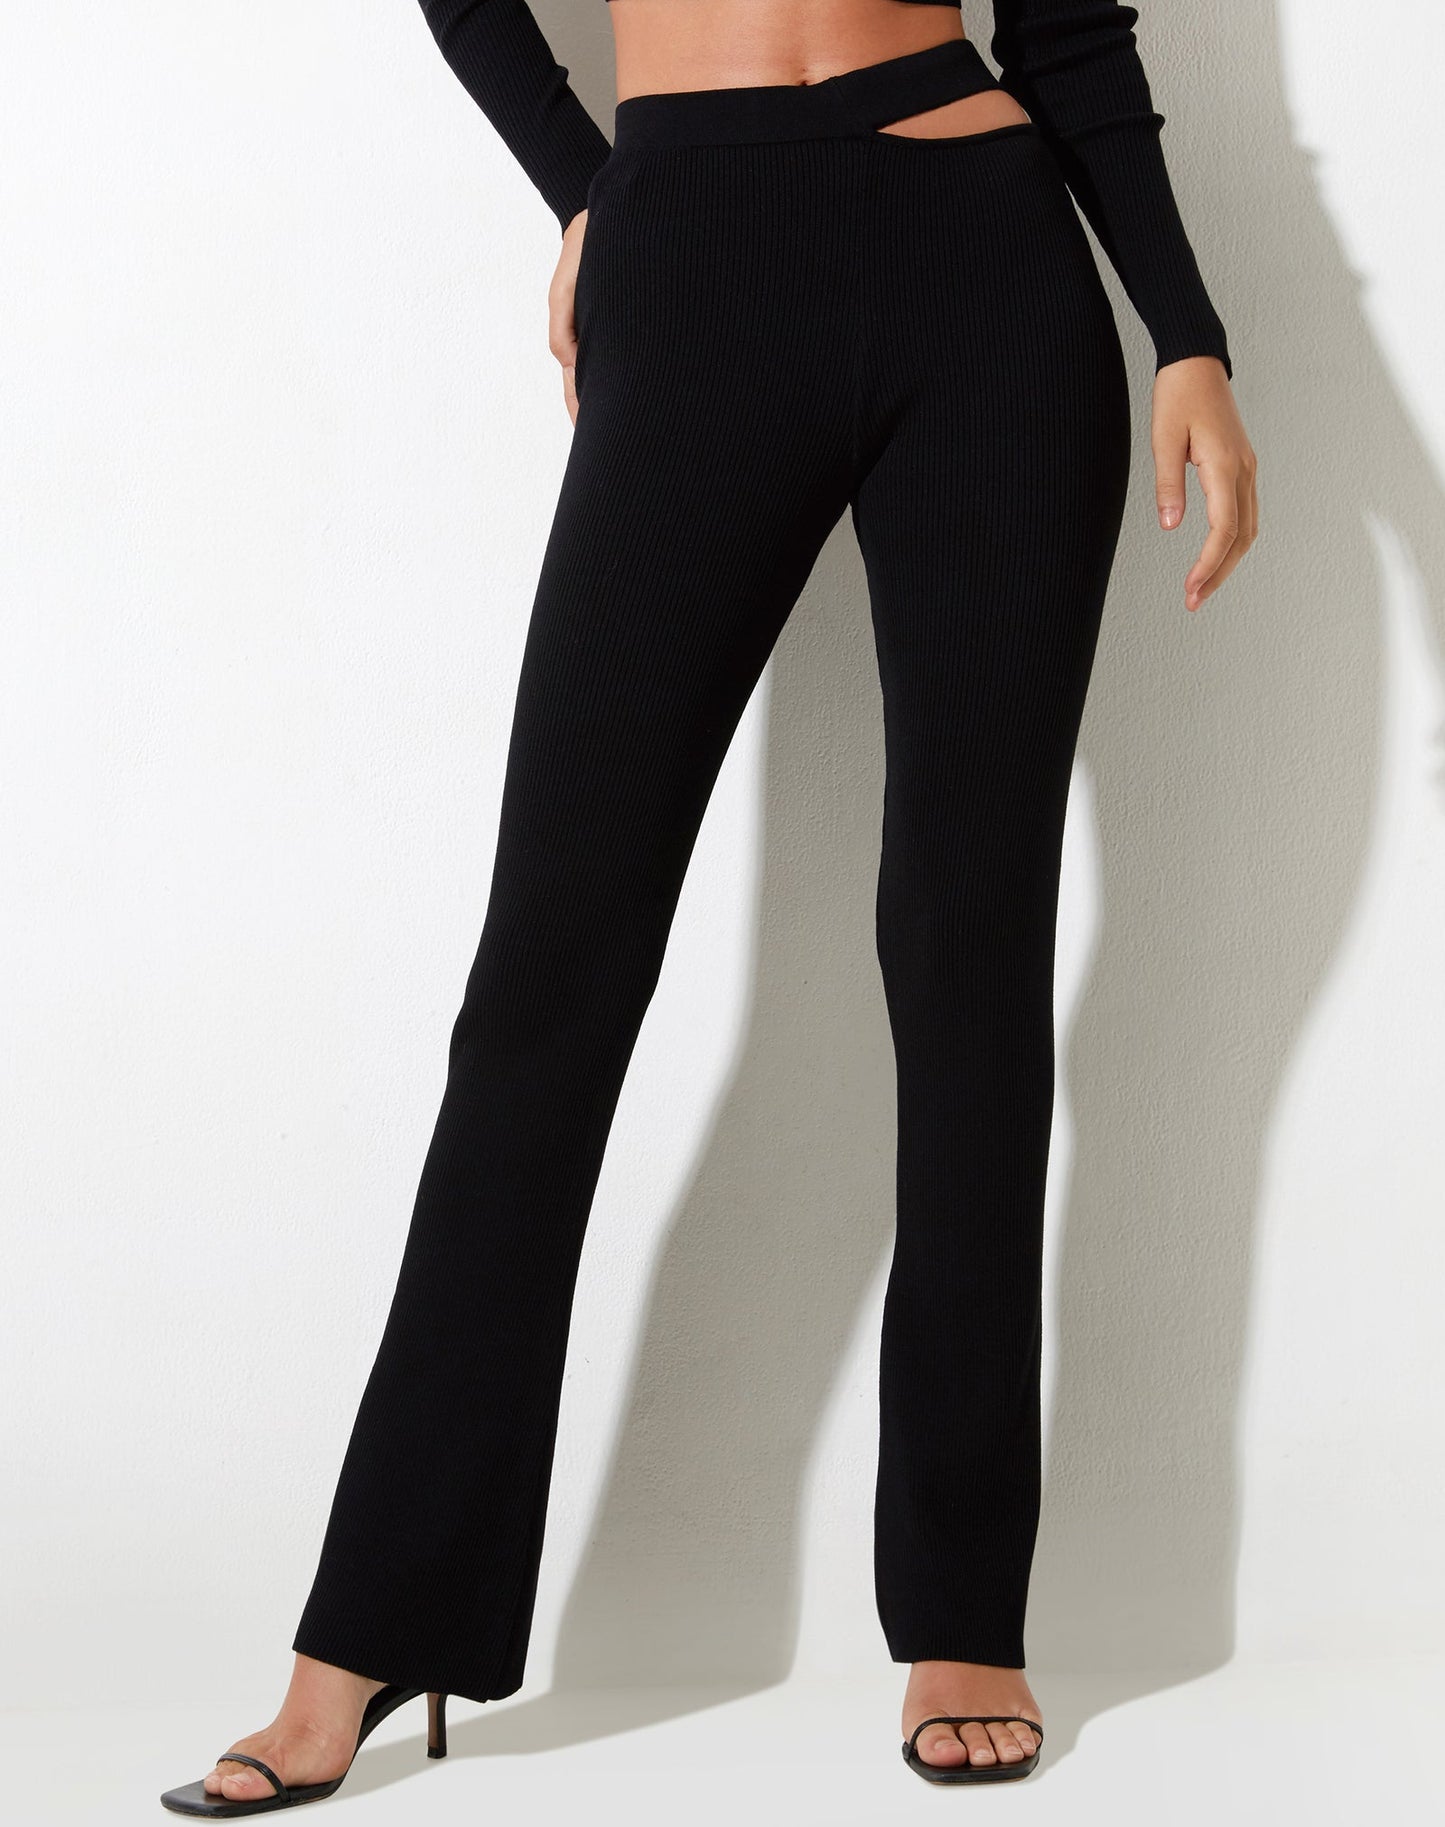 Black Trouser In Lycra With One SIde Cut Out Waist